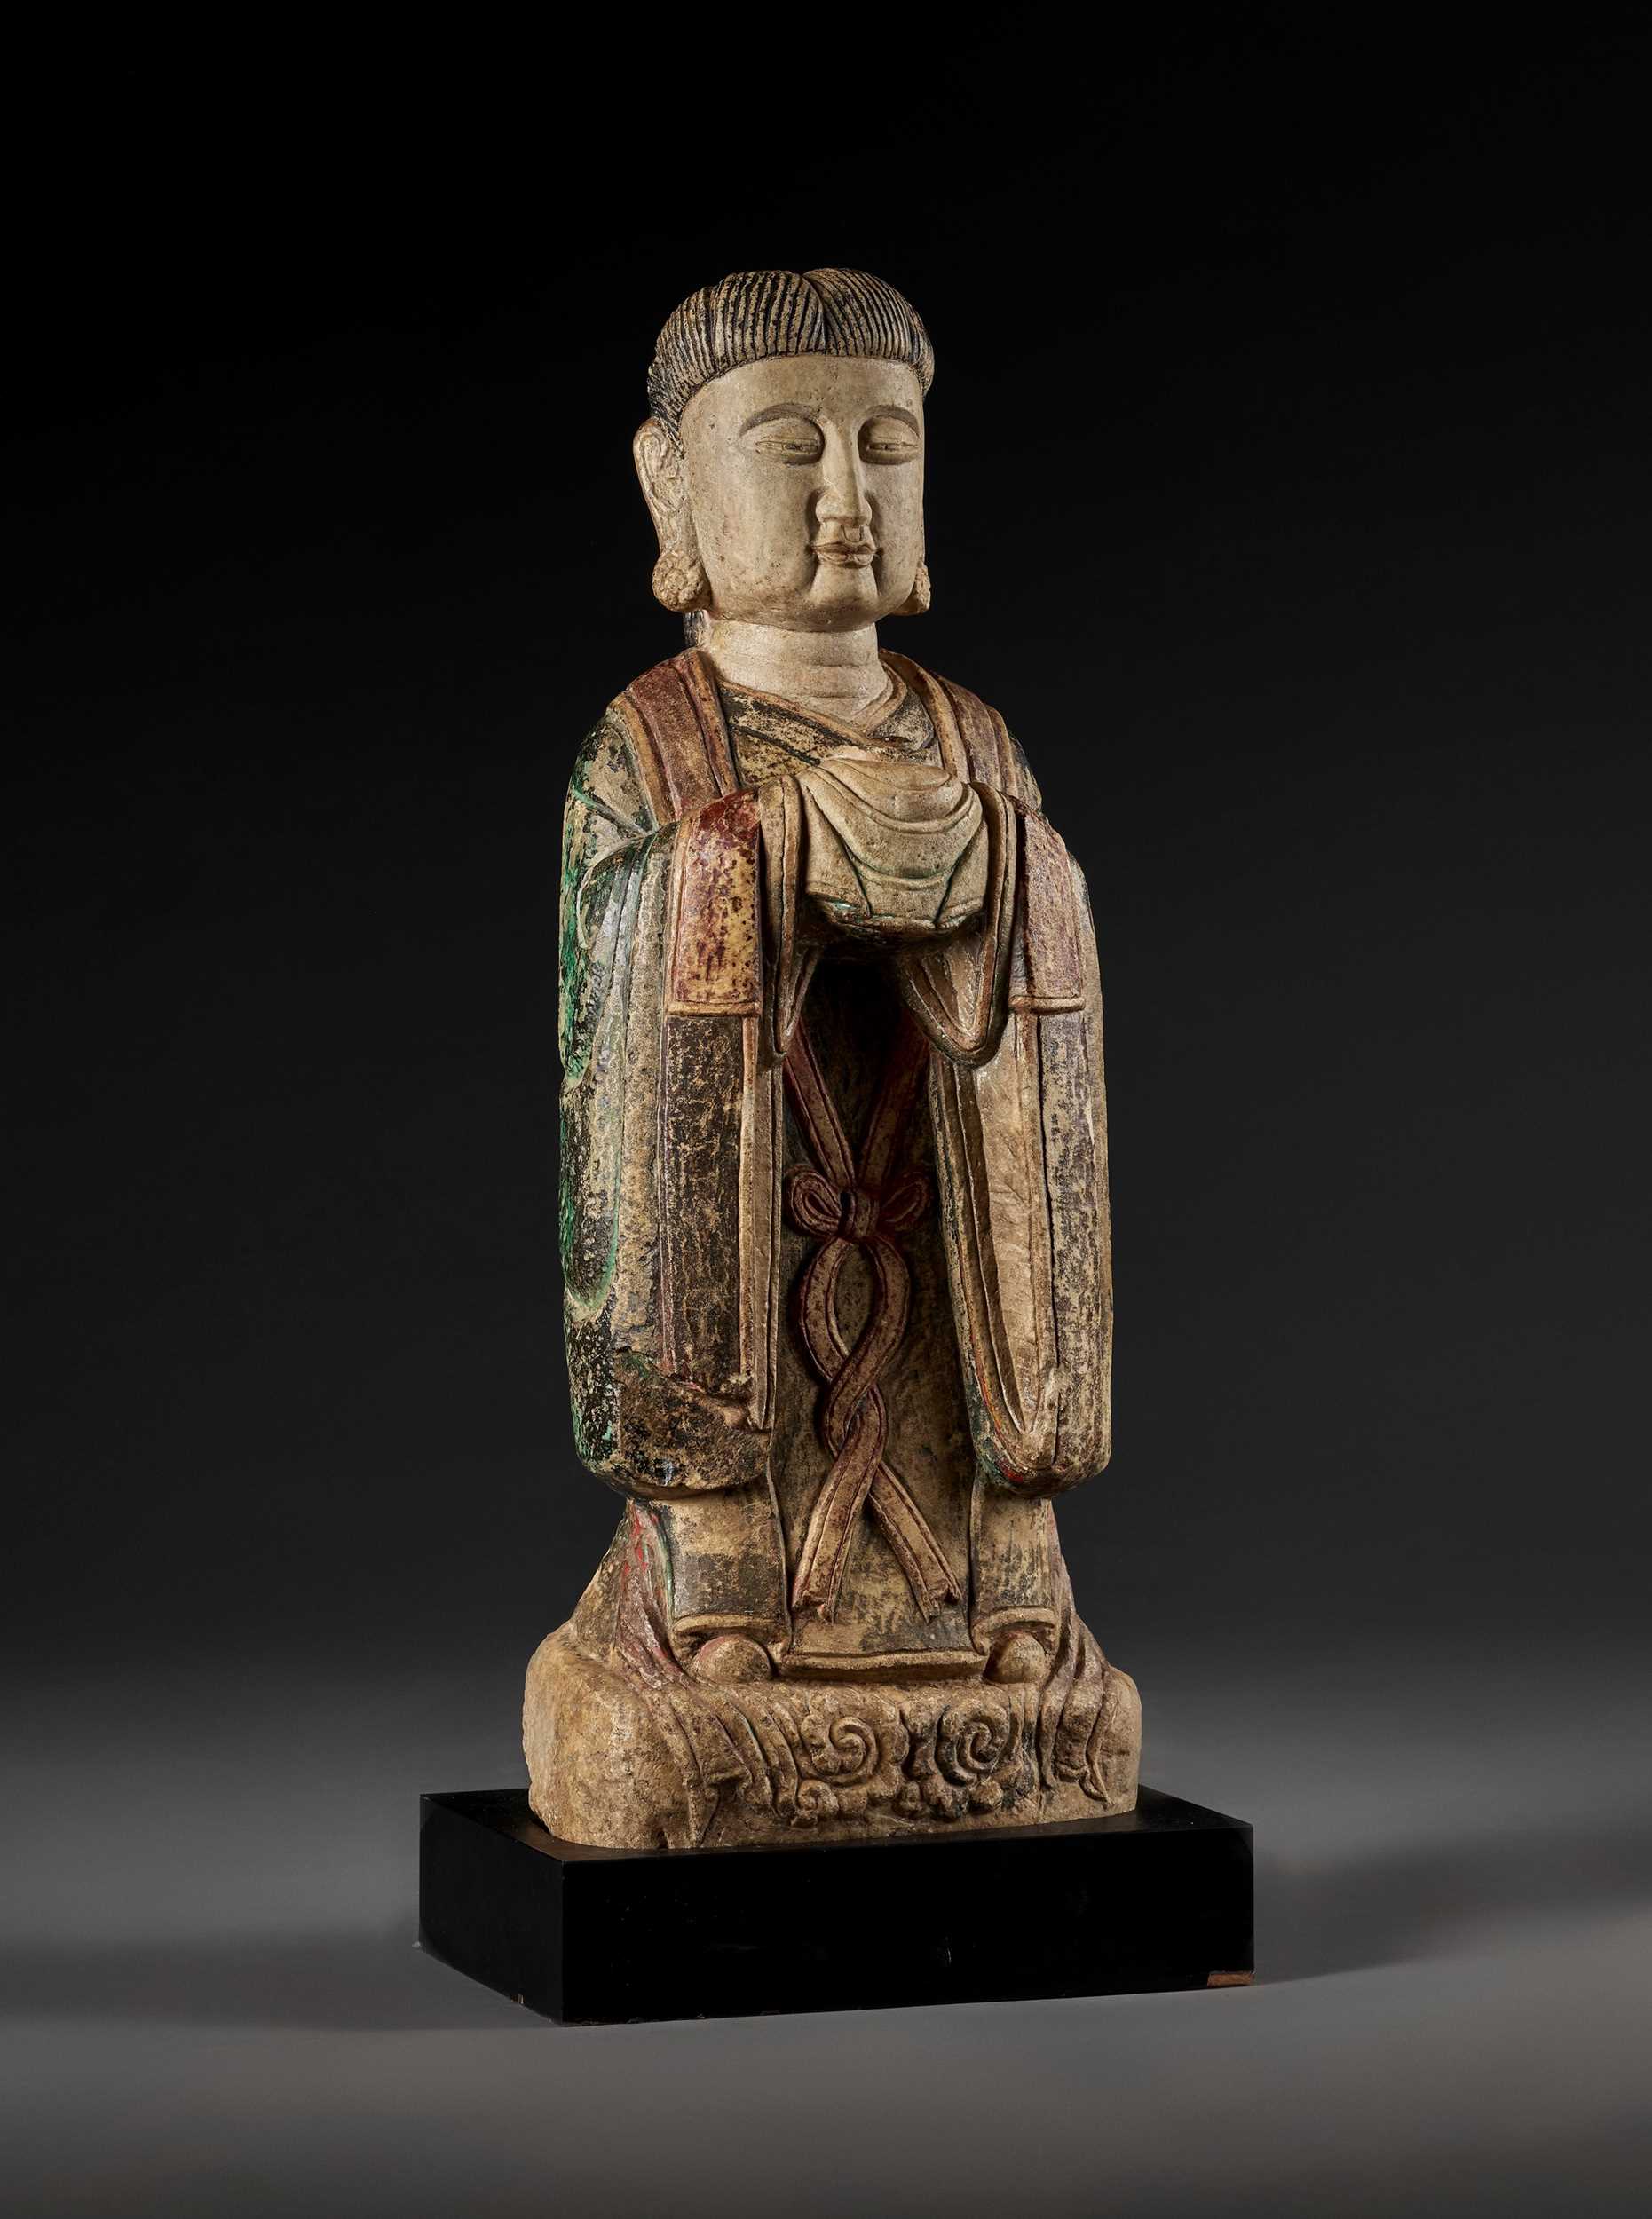 Lot 366 - A RARE AND MONUMENTAL PAINTED MARBLE FIGURE OF A ‘WINE SERVANT’, LIAO DYNASTY